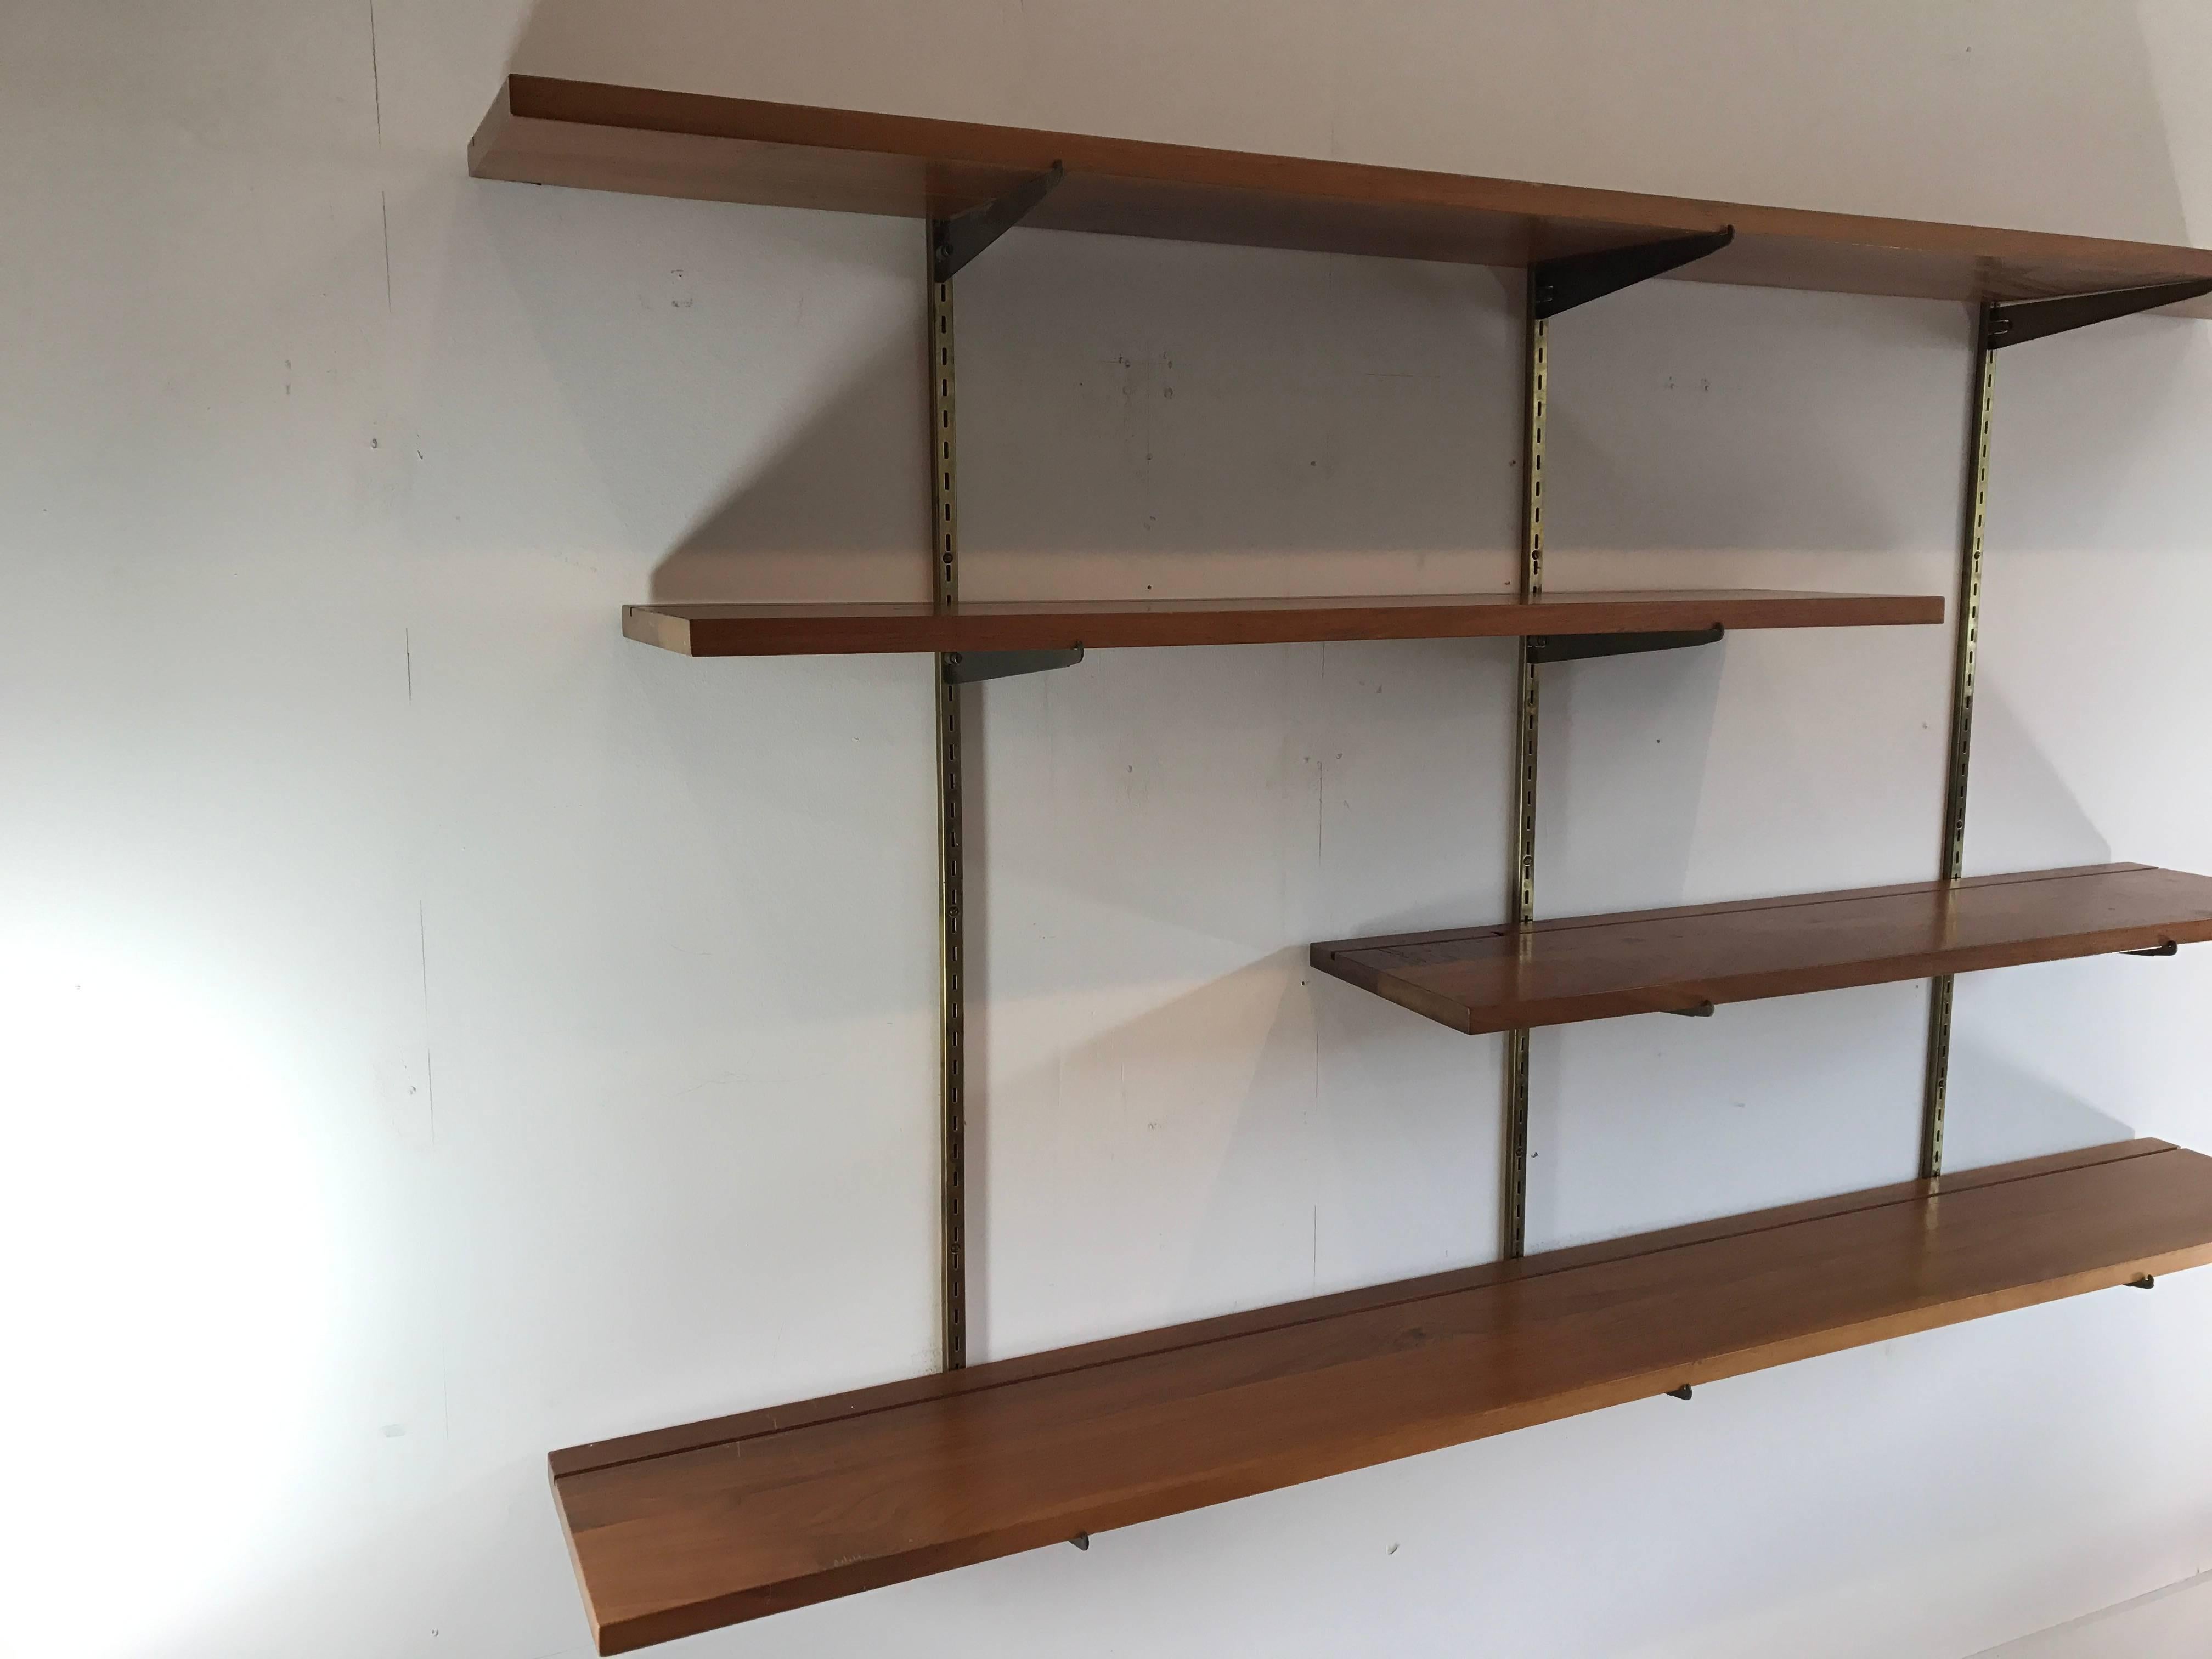 Beautiful and minimal walnut shelf unit with solid brass brackets and hardware by George Nelson. Can configure multiple ways. Shelves are solid walnut and have original finish. Surface scratches, but no structural issues, one smaller shelf has